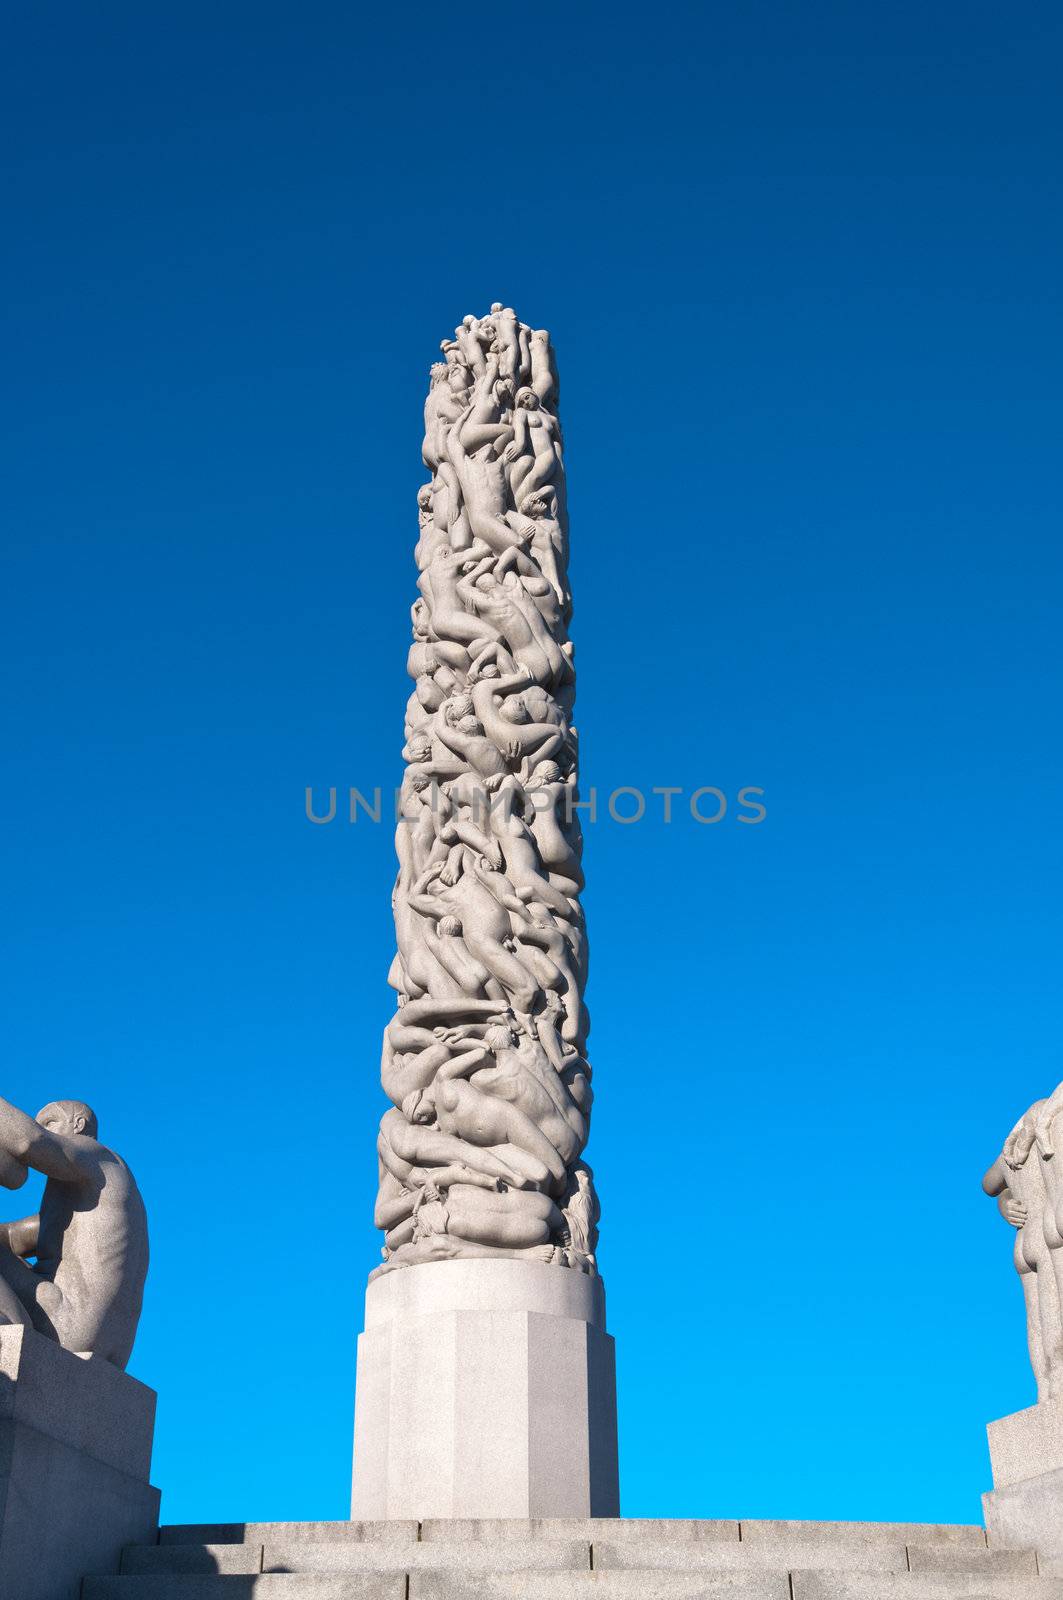 Column of bodies in the Vigeland Park. Oslo, Norway.